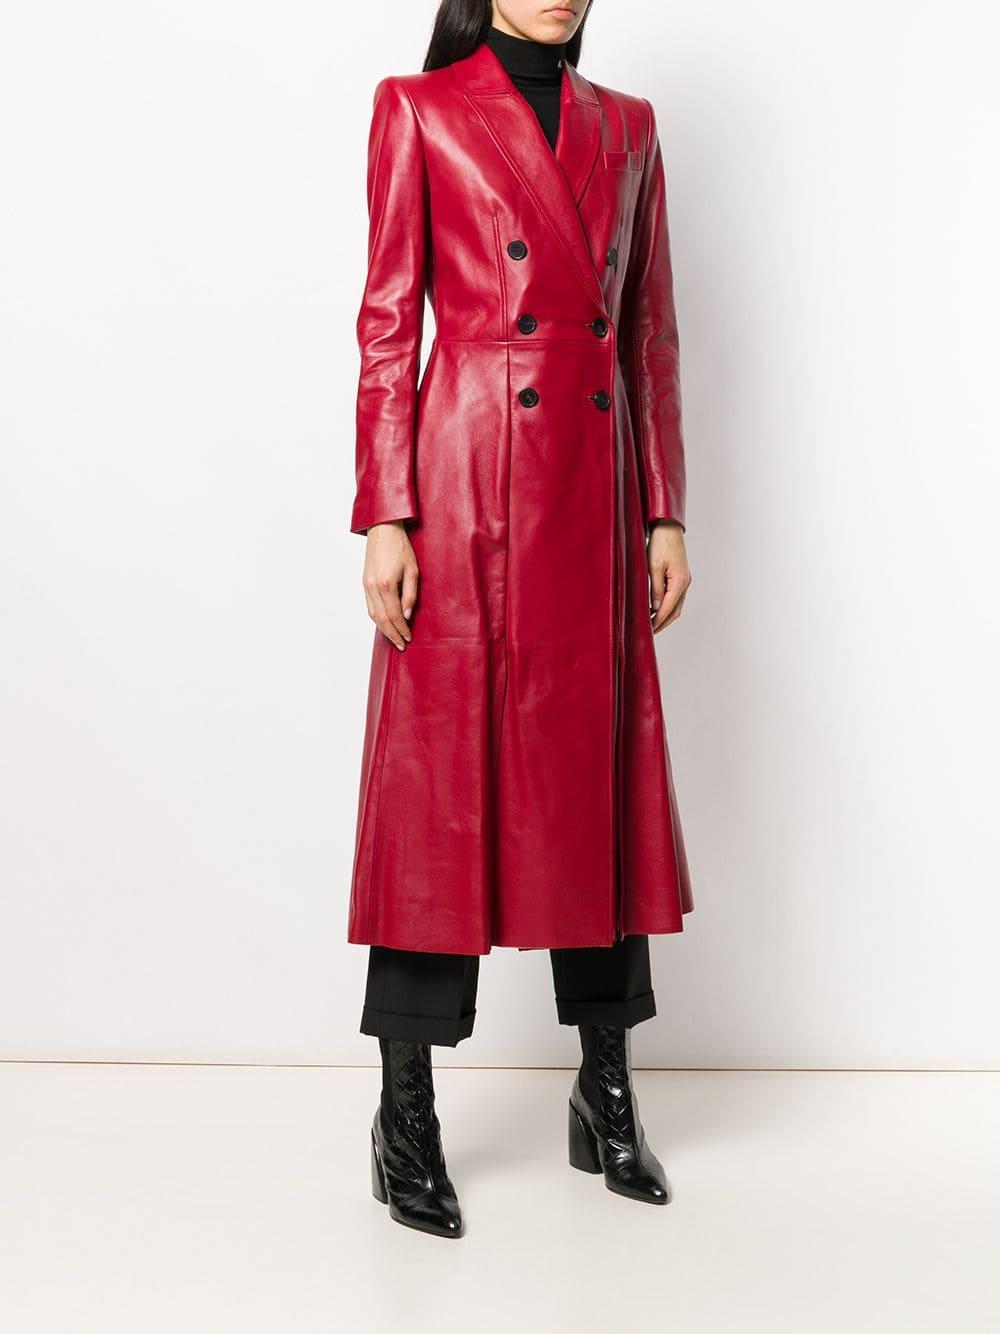 Alexander McQueen Leather Double-breasted Trench Coat in Red - Lyst